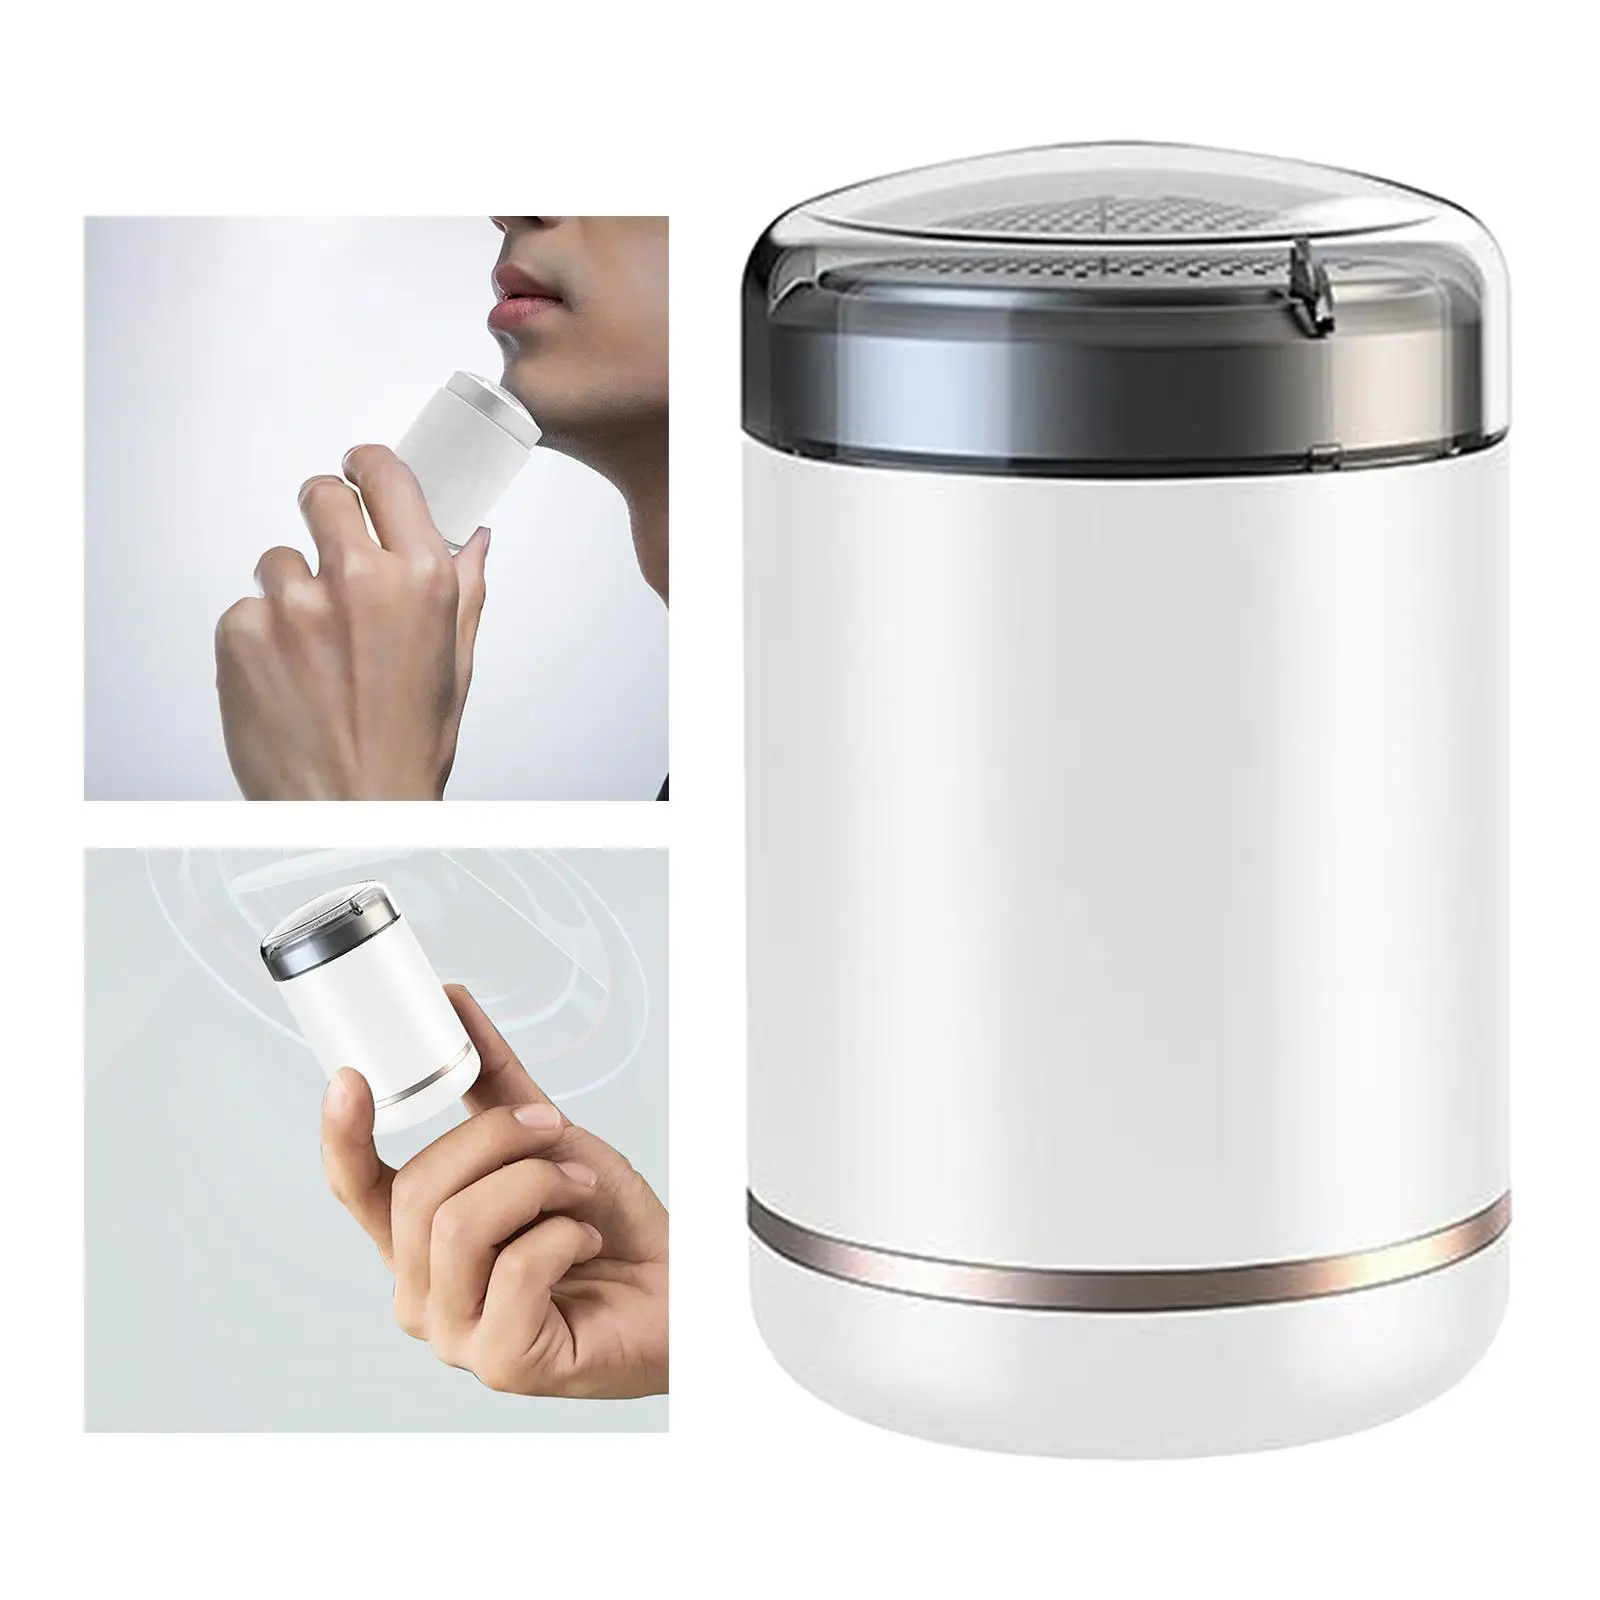 Travel Small Mini Compact Electric Shaver Wet & Dry Use USB Rechargeable